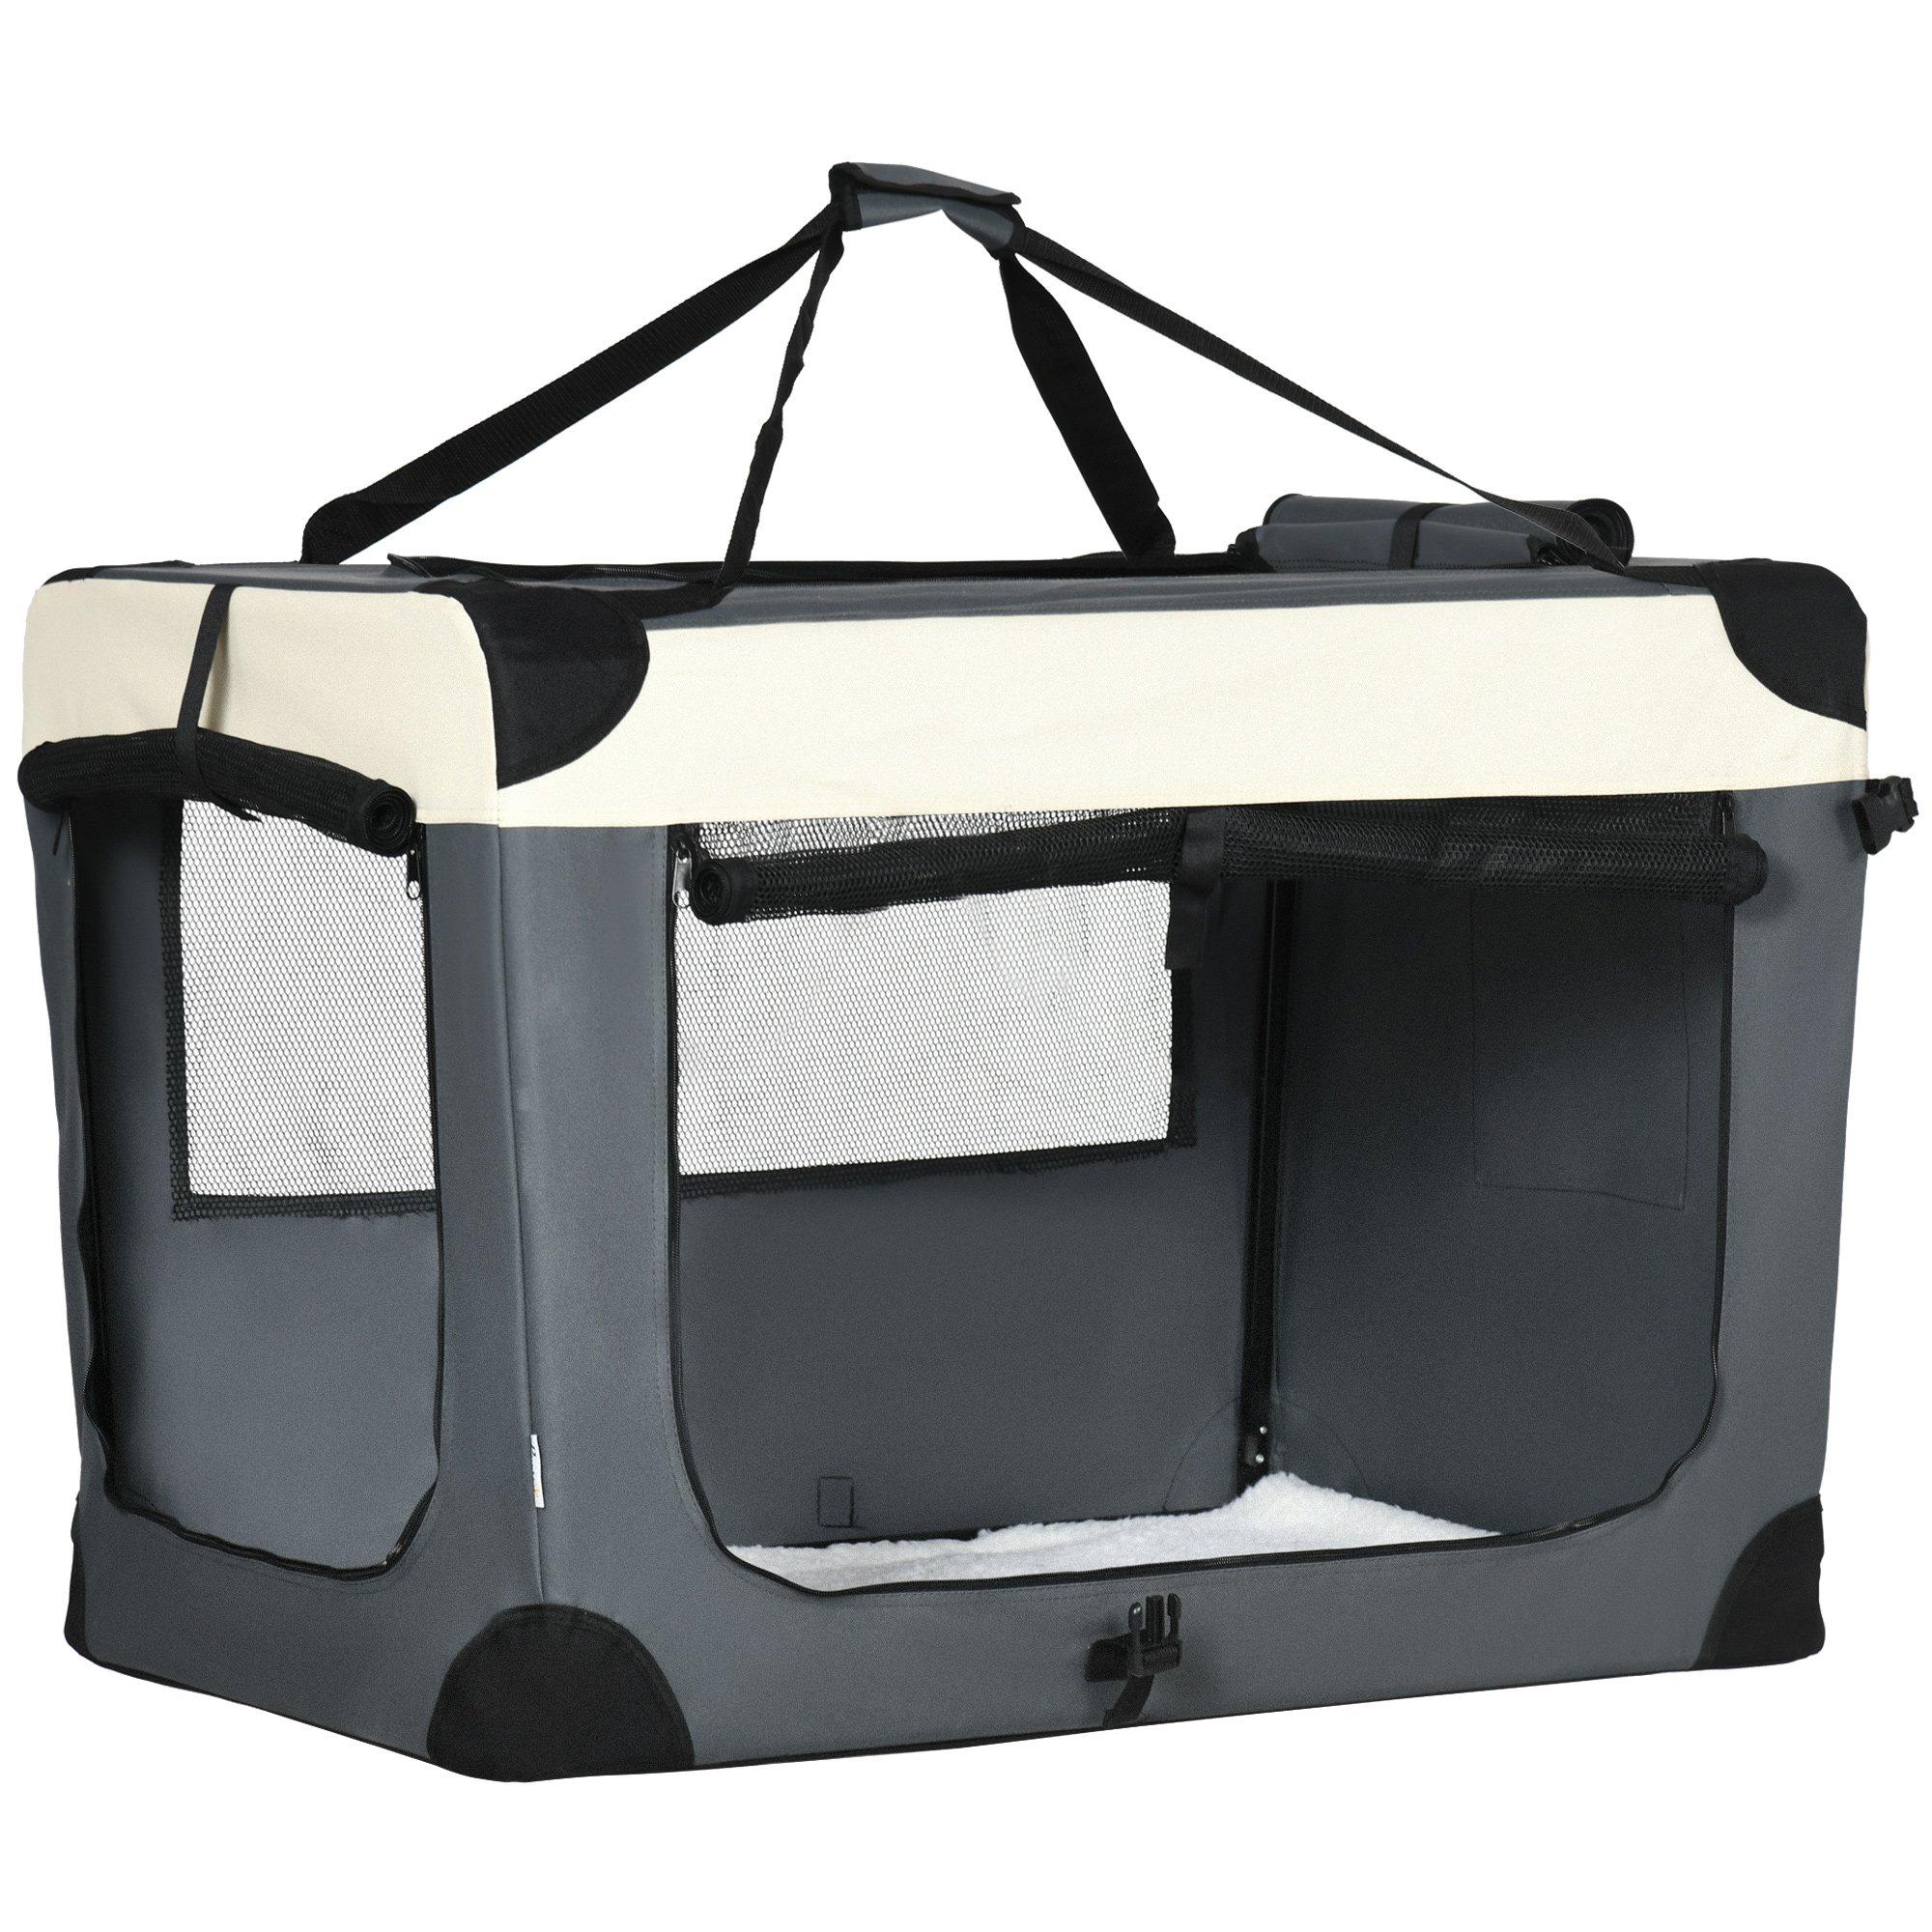 Foldable Pet Carrier for Dogs, Portable Cat Carrier Soft Side Pet Travel Crate with Removable Mat, B